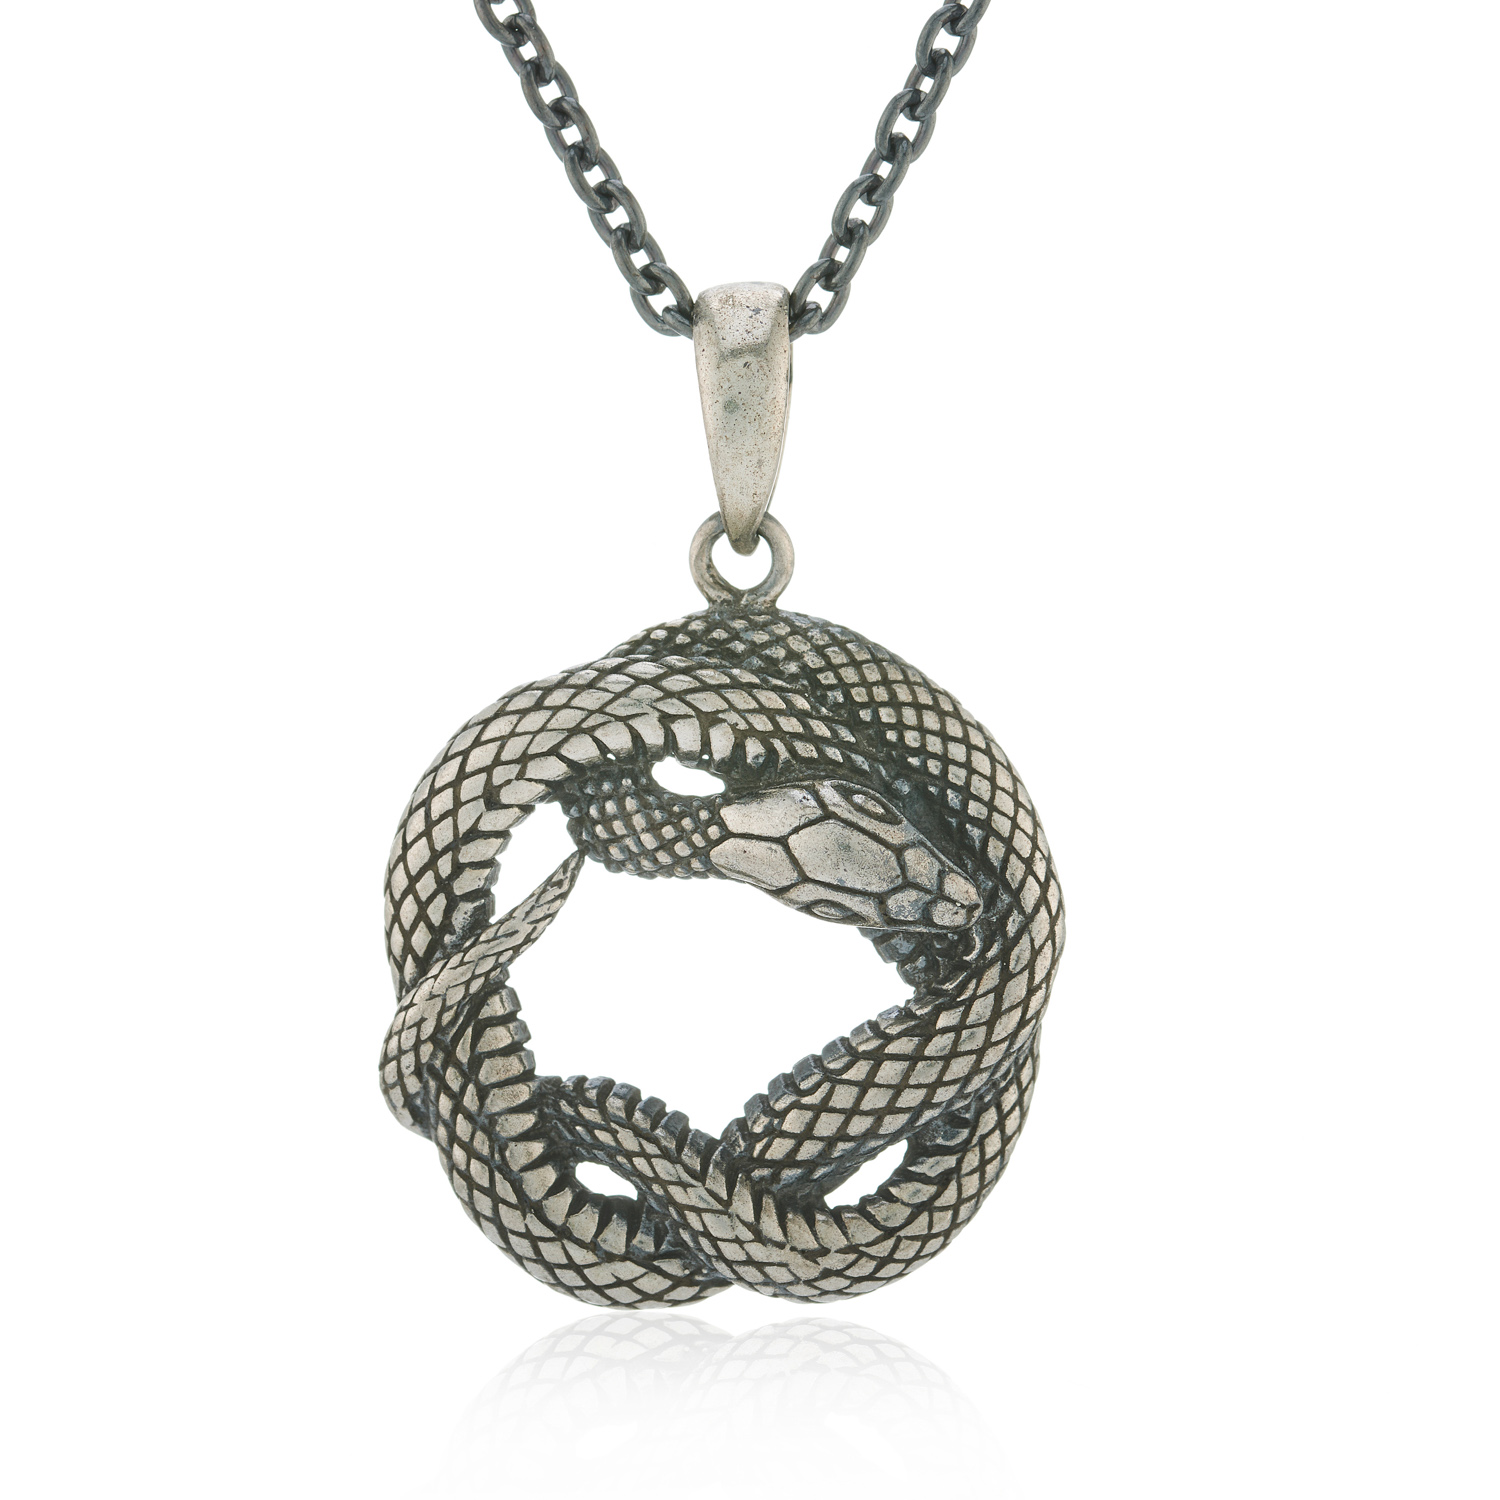 Window Dressing The Soul Oxidised 925 Silver Snake Necklace